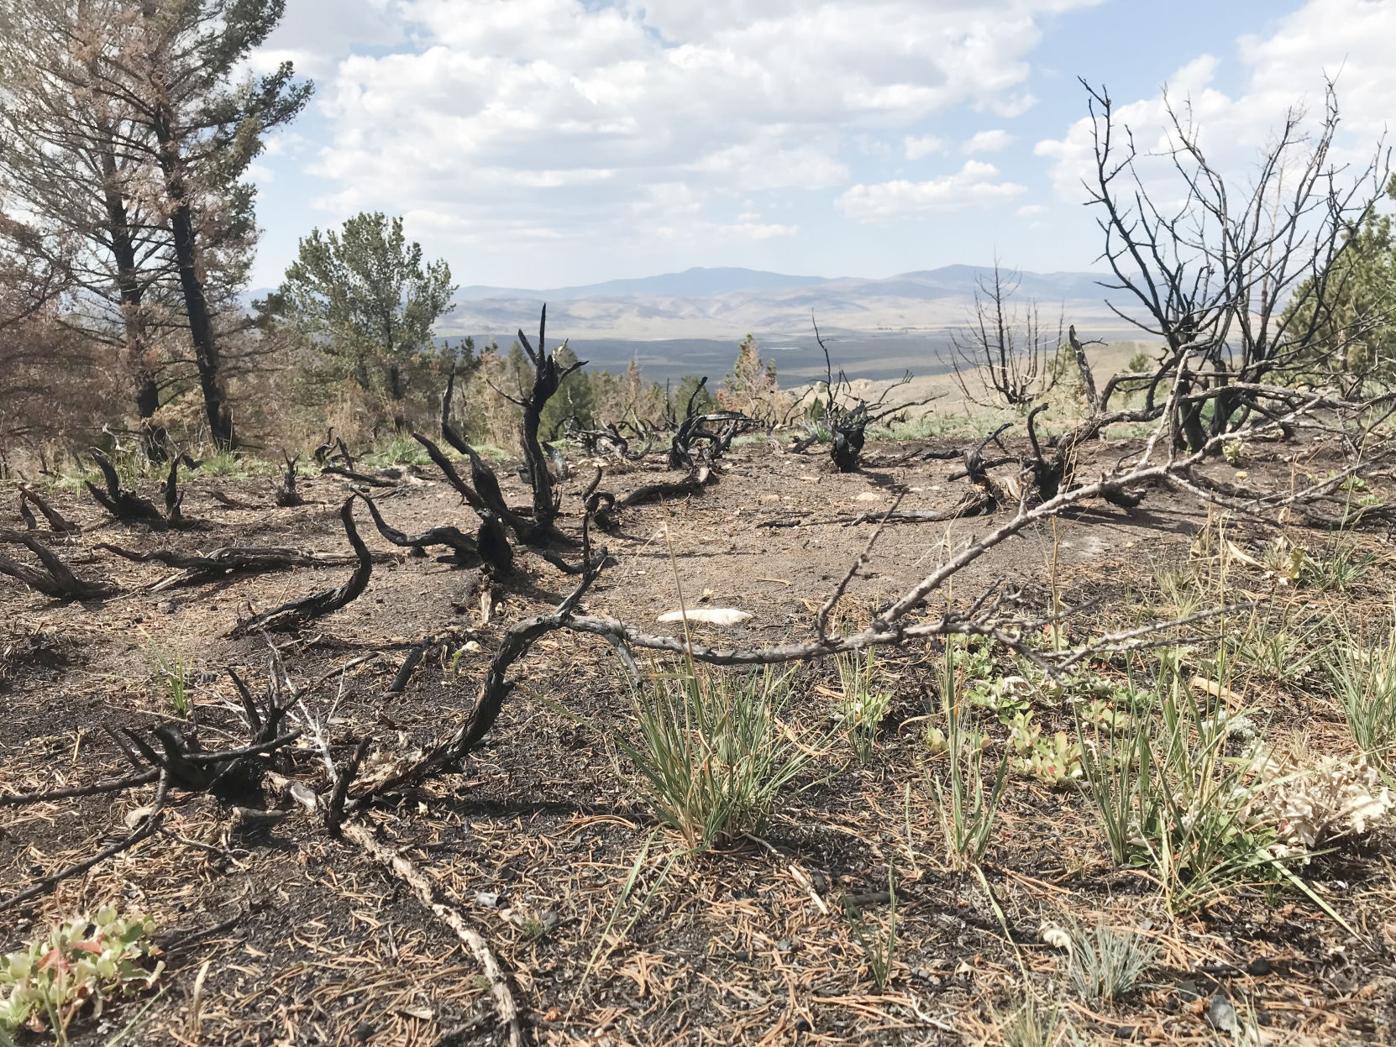 An image of the Mullen Fire area, showing cheatgrass growing amid the scorched earth and remains of plant life.